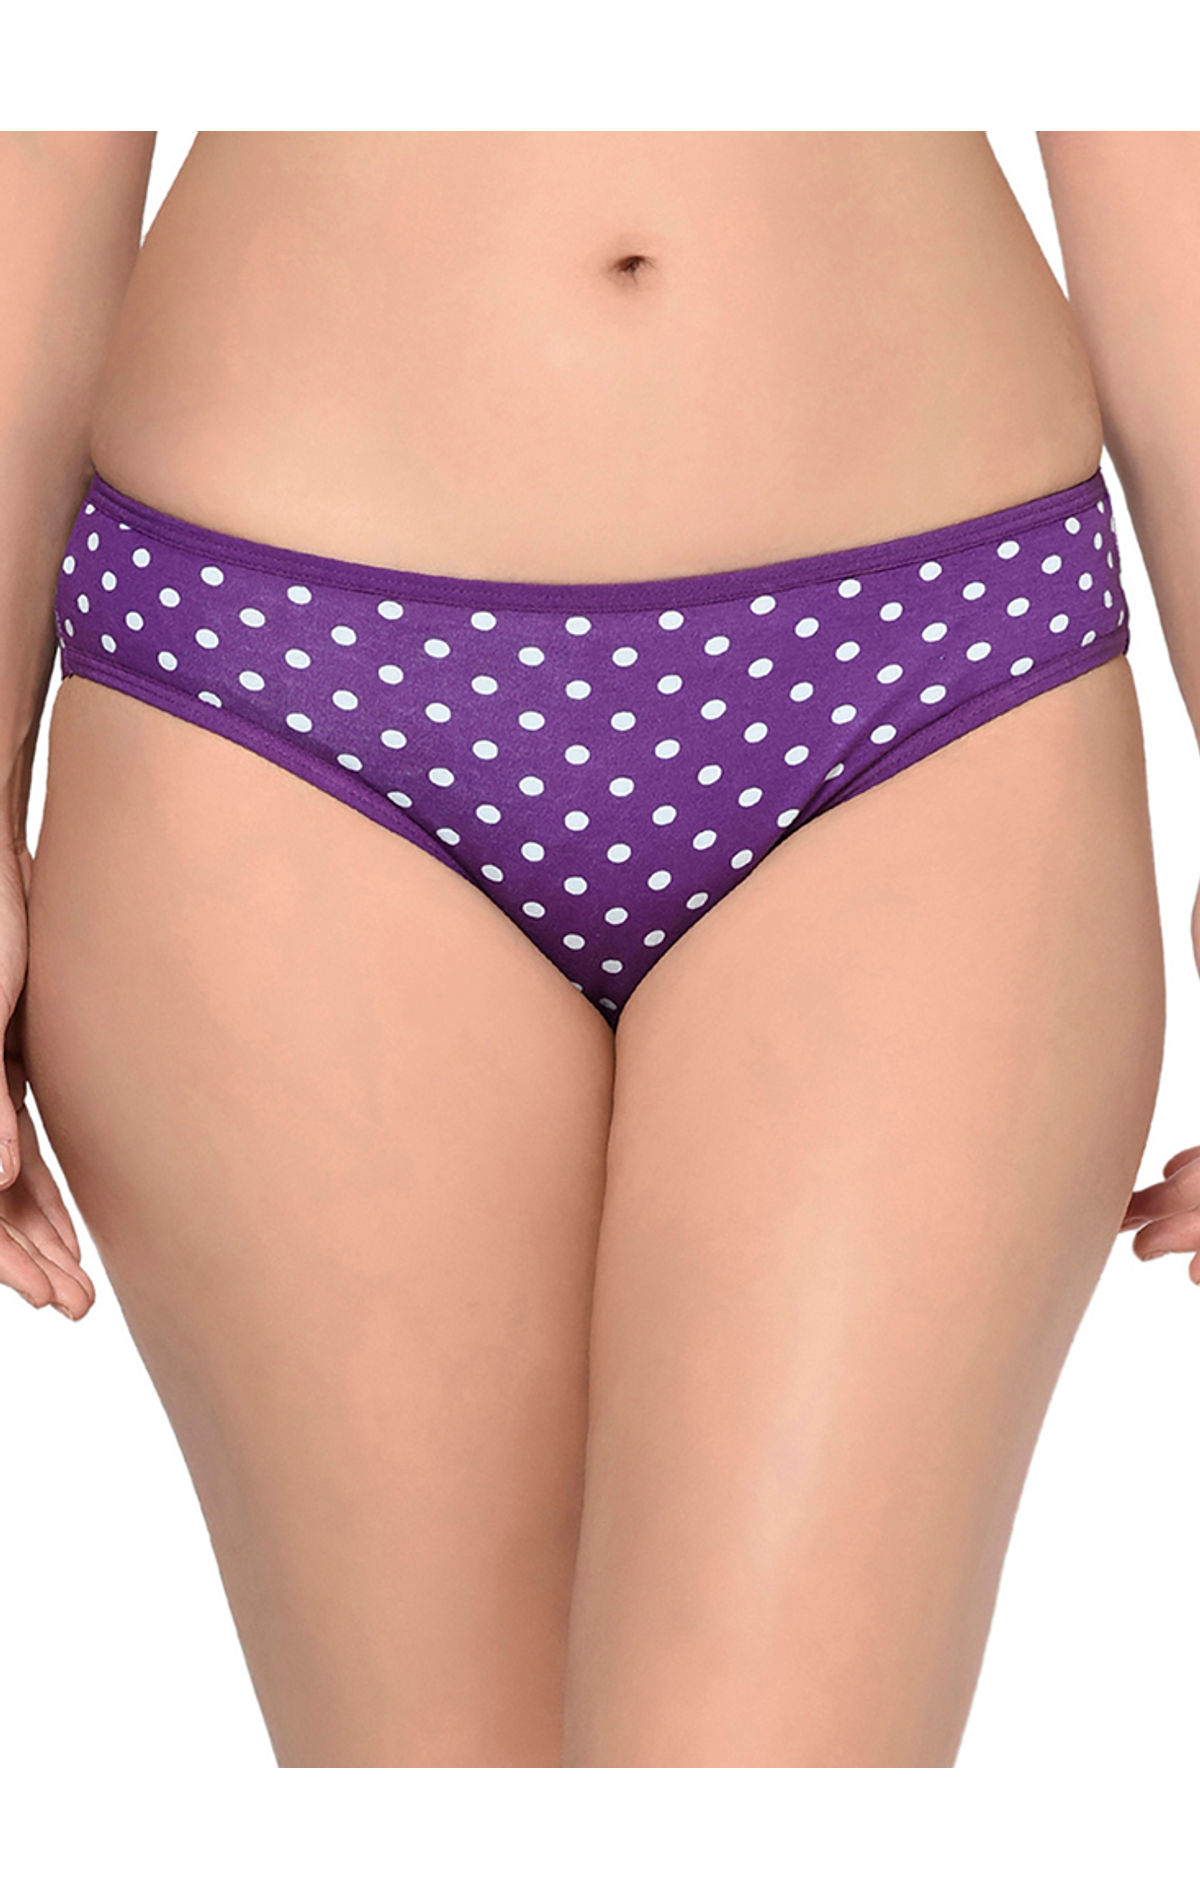 Bodycare Pack Of 3 Printed Panty In Assorted Colors-8557b-3pcs